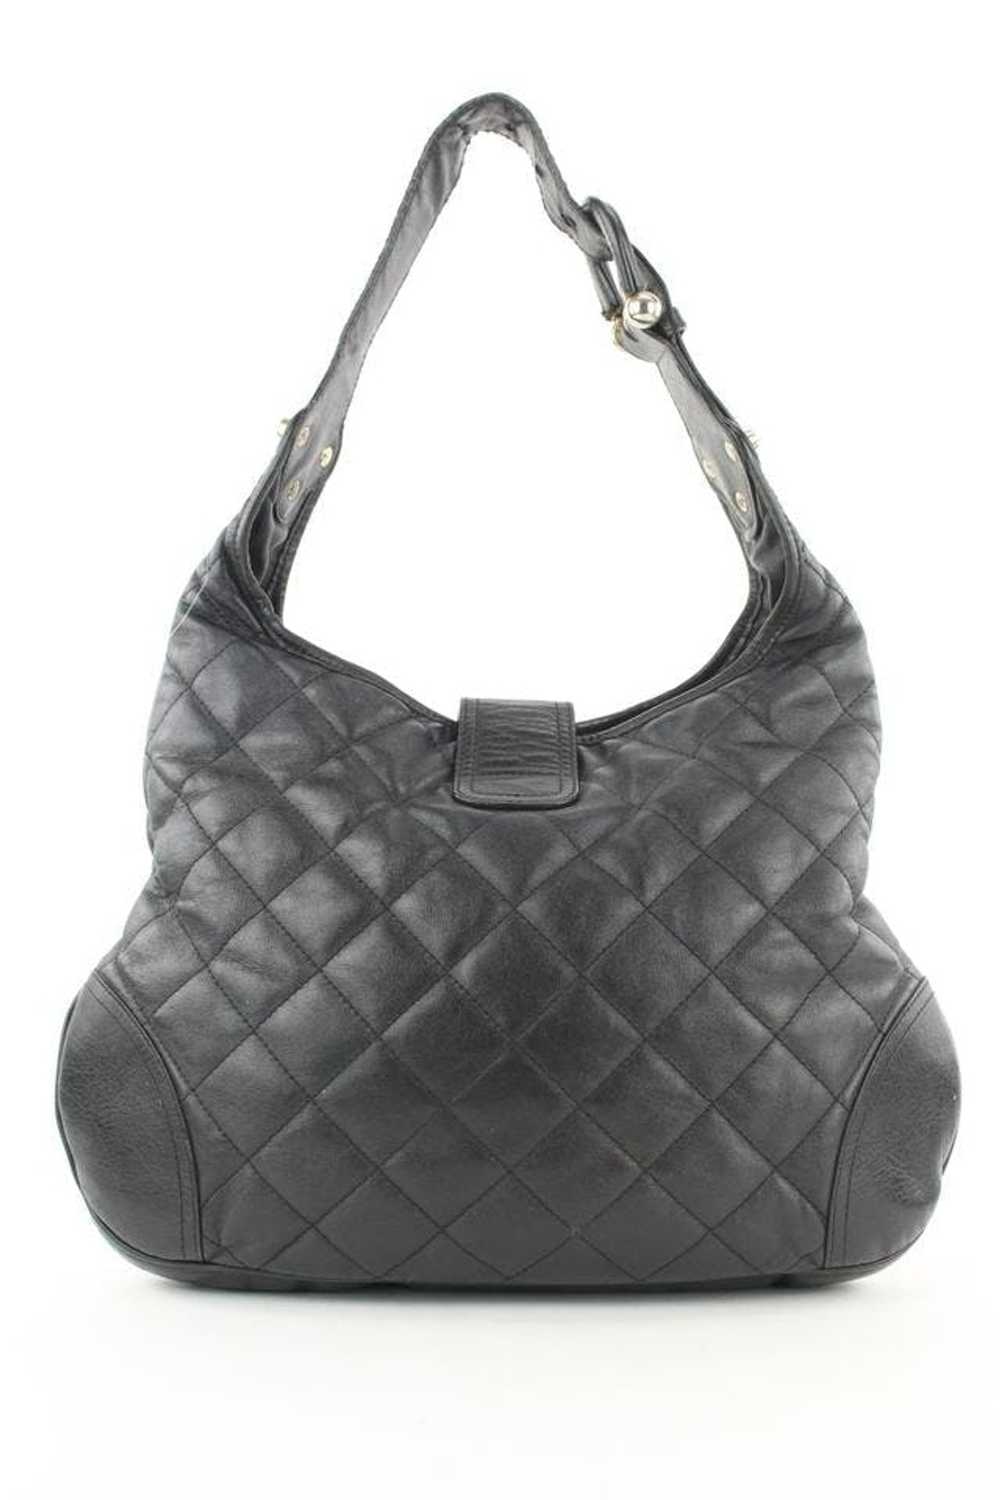 Burberry Burberry Black Quilted Leather Brook Hob… - image 7